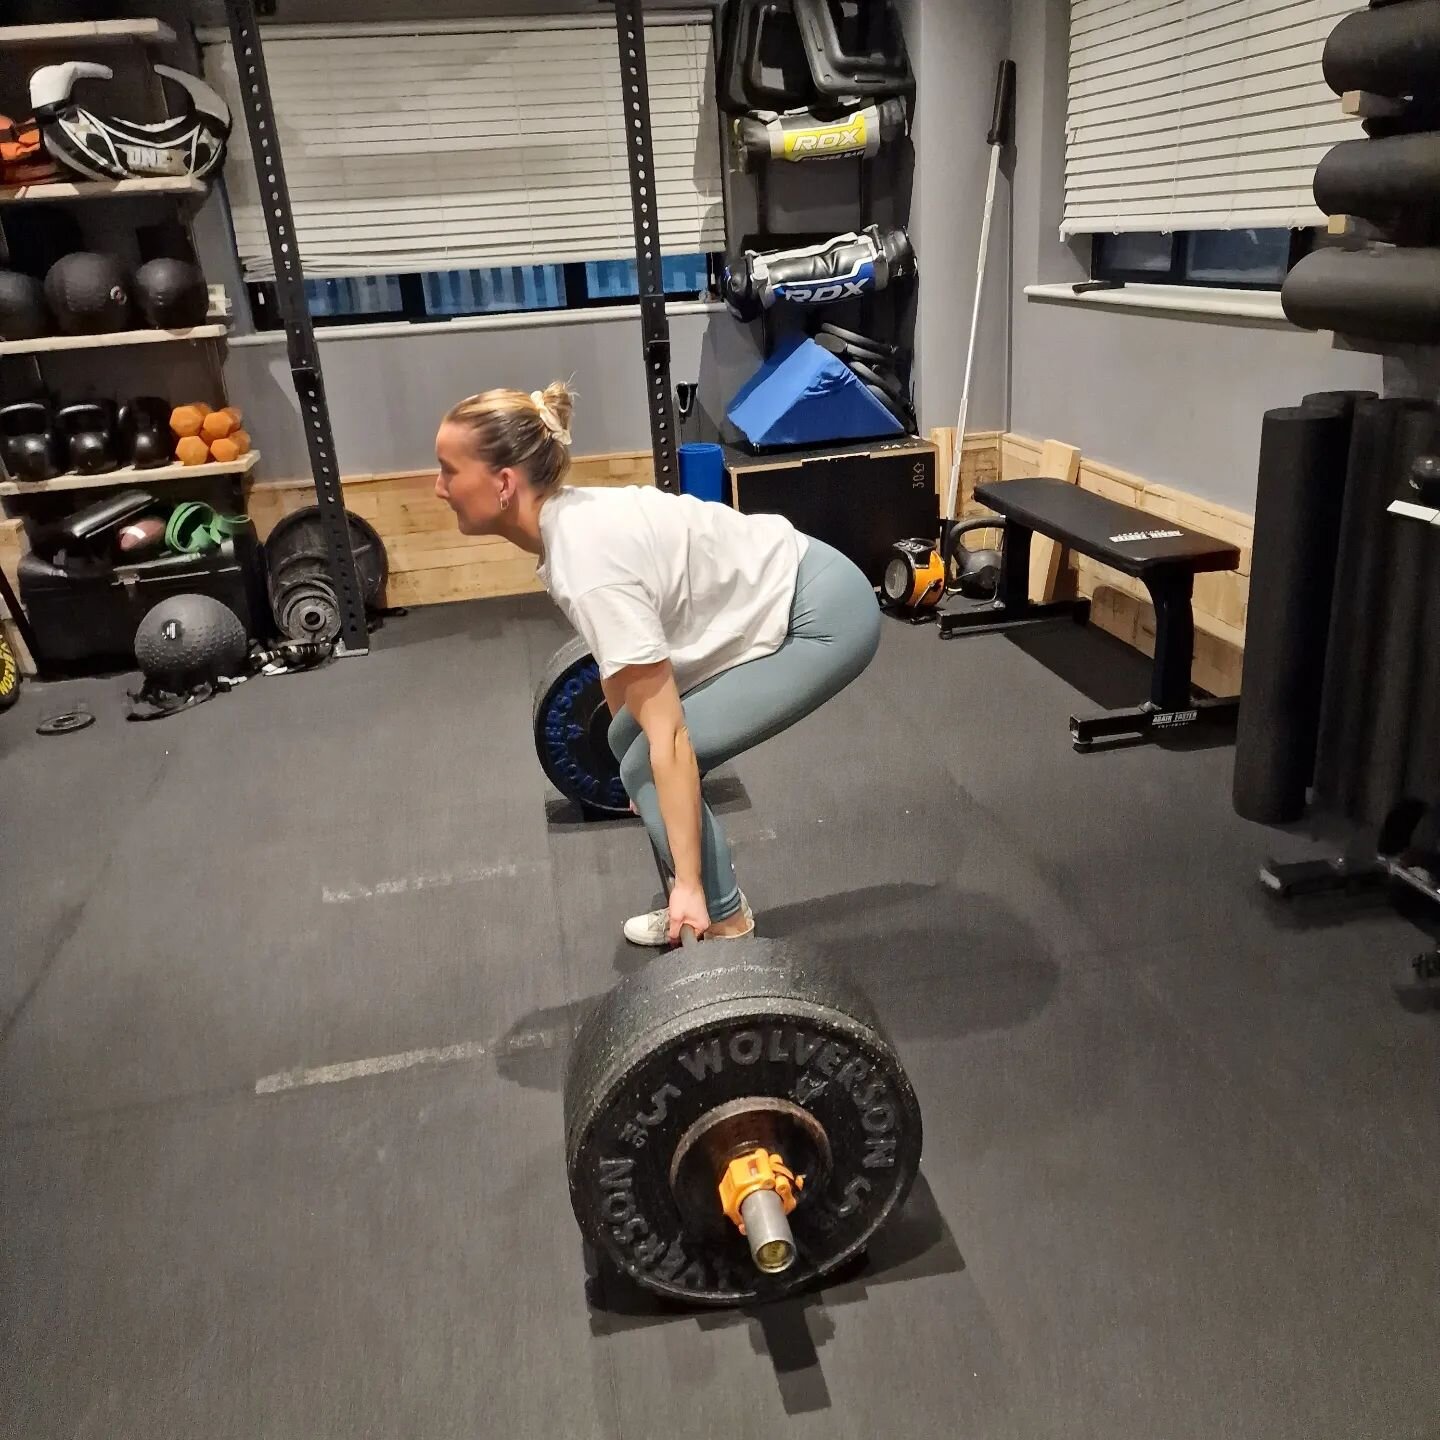 Big deadlift PB for @hampton_emily04 this week!! 🔥🔥
.
90kg lift!  This girl is flying.... maintaining her incredible weight loss and getting stronger every week!!
.
#colchesterpersonaltrainer #clientappreciation #mplclaims #corporatept #deadlift #p